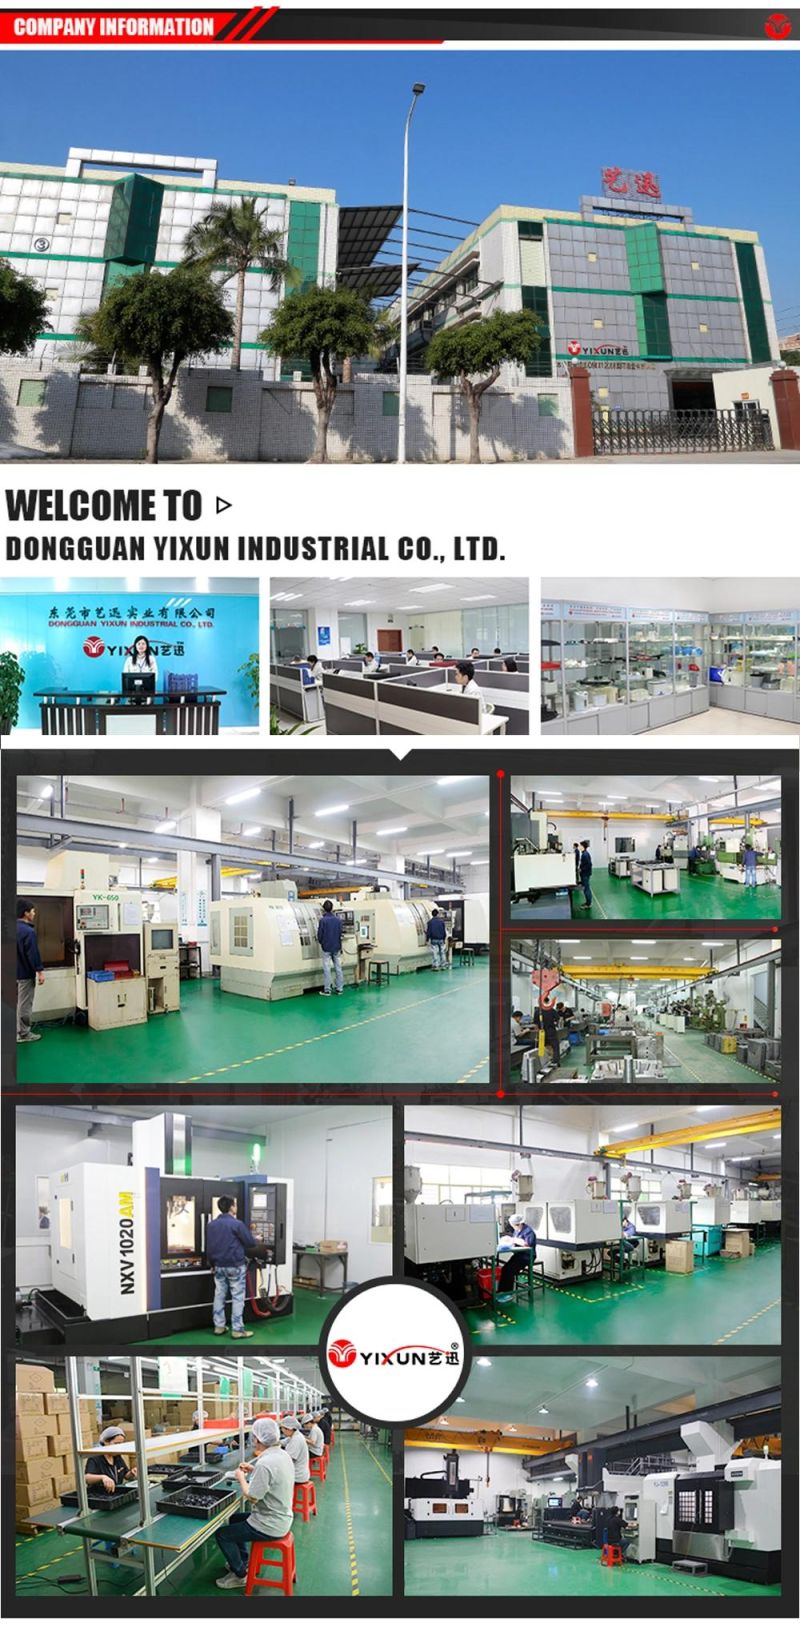 Dongguan Professional Mould Maker Manufacturer Hosehold Plastic Products Air Humidifier Shell Injection Mold.